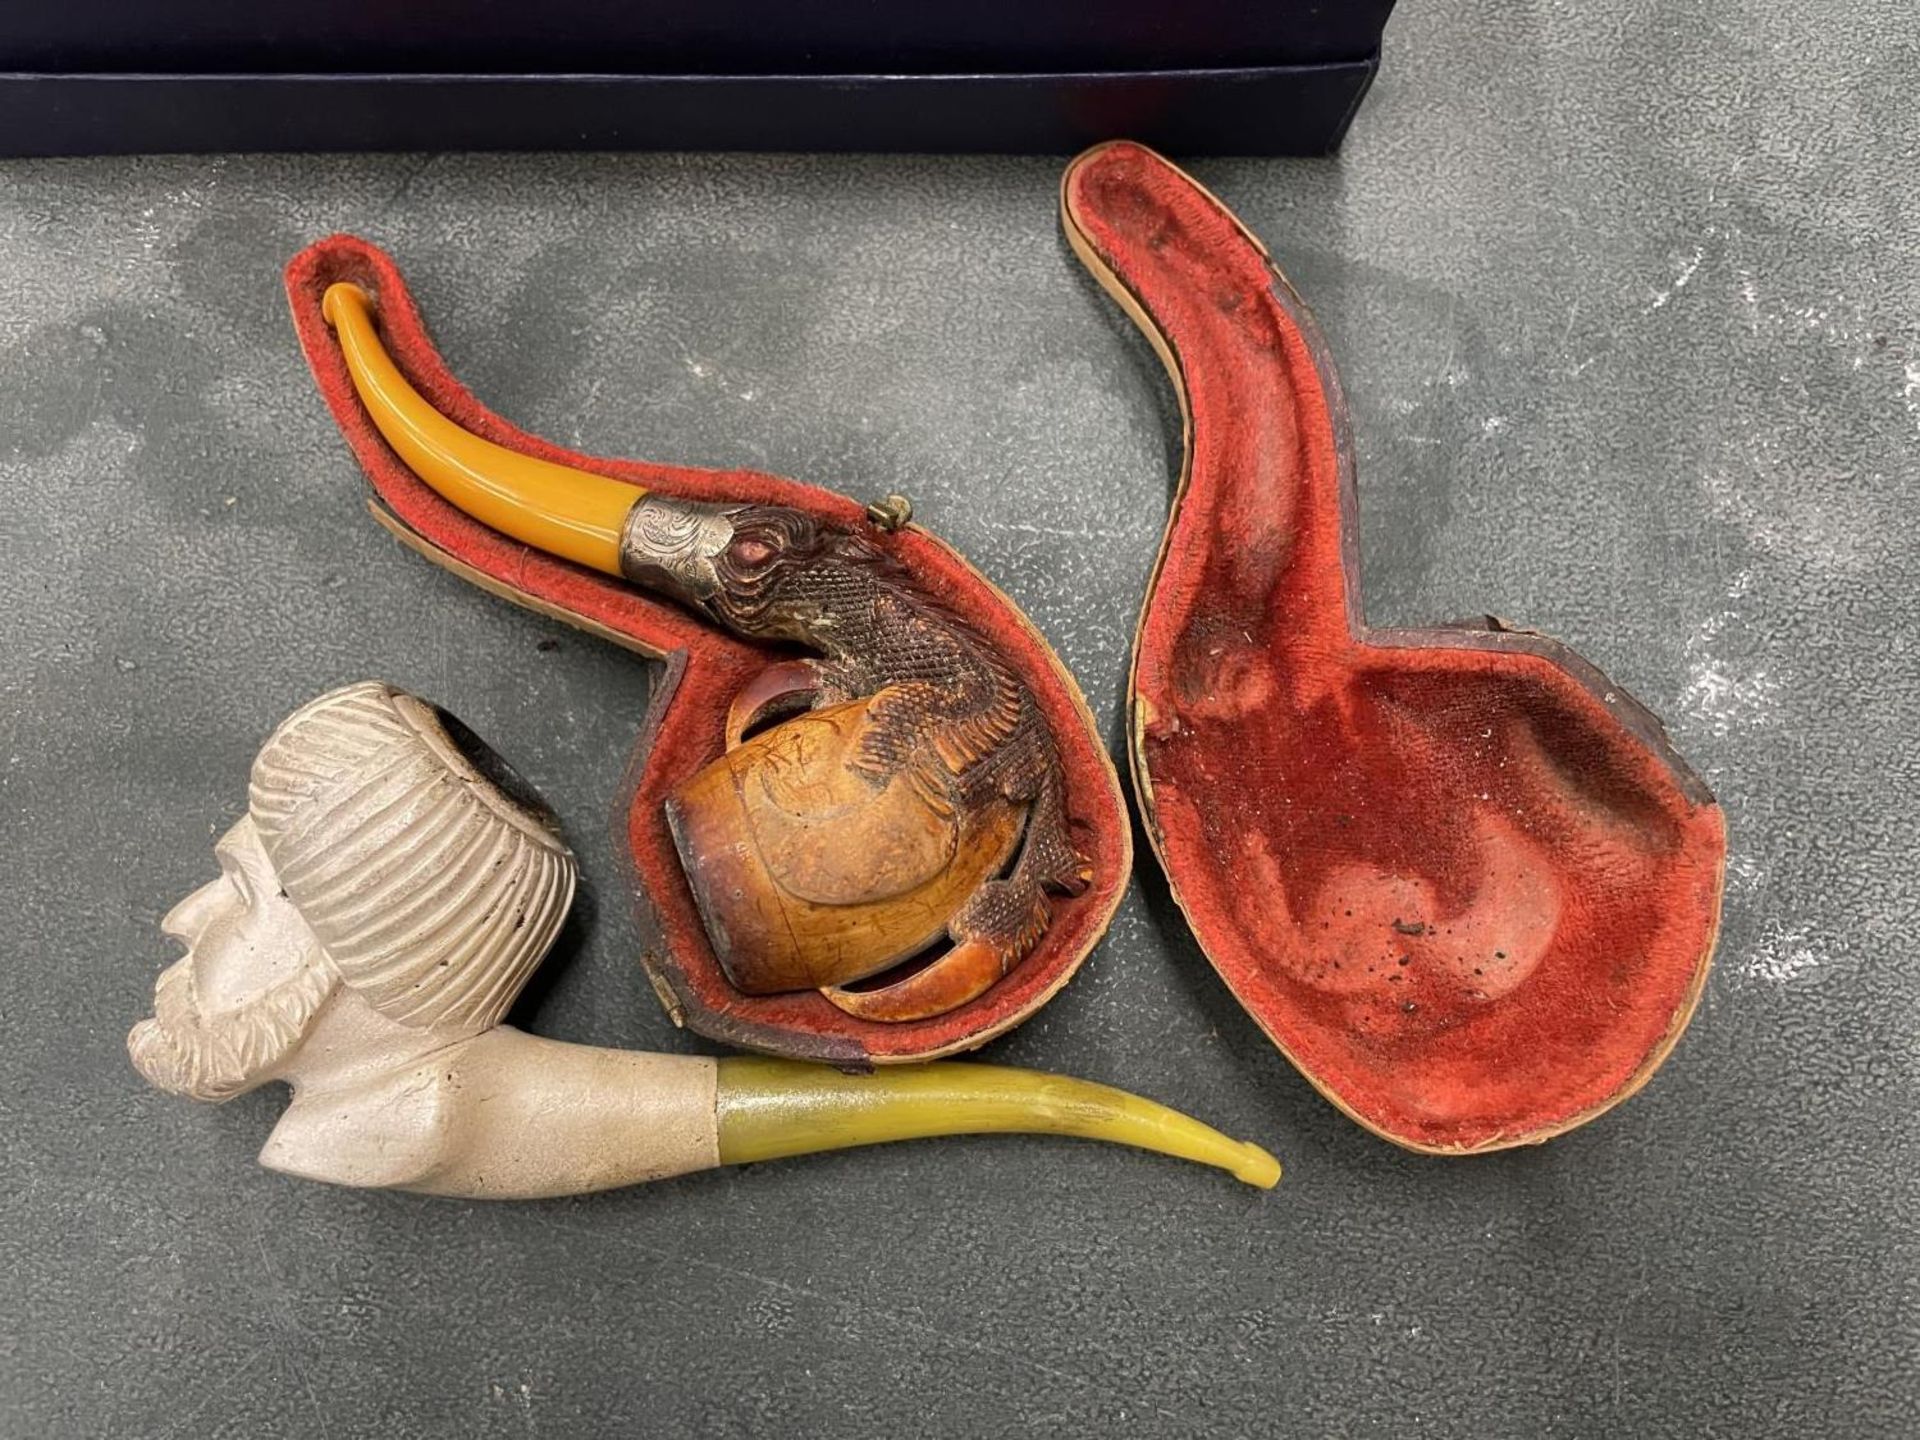 TWO MEERSCHAUM PIPES ONE WITH A CONTINENTAL SILVER COLLAR WITH CASE AND A FURTHER EXAMPLE